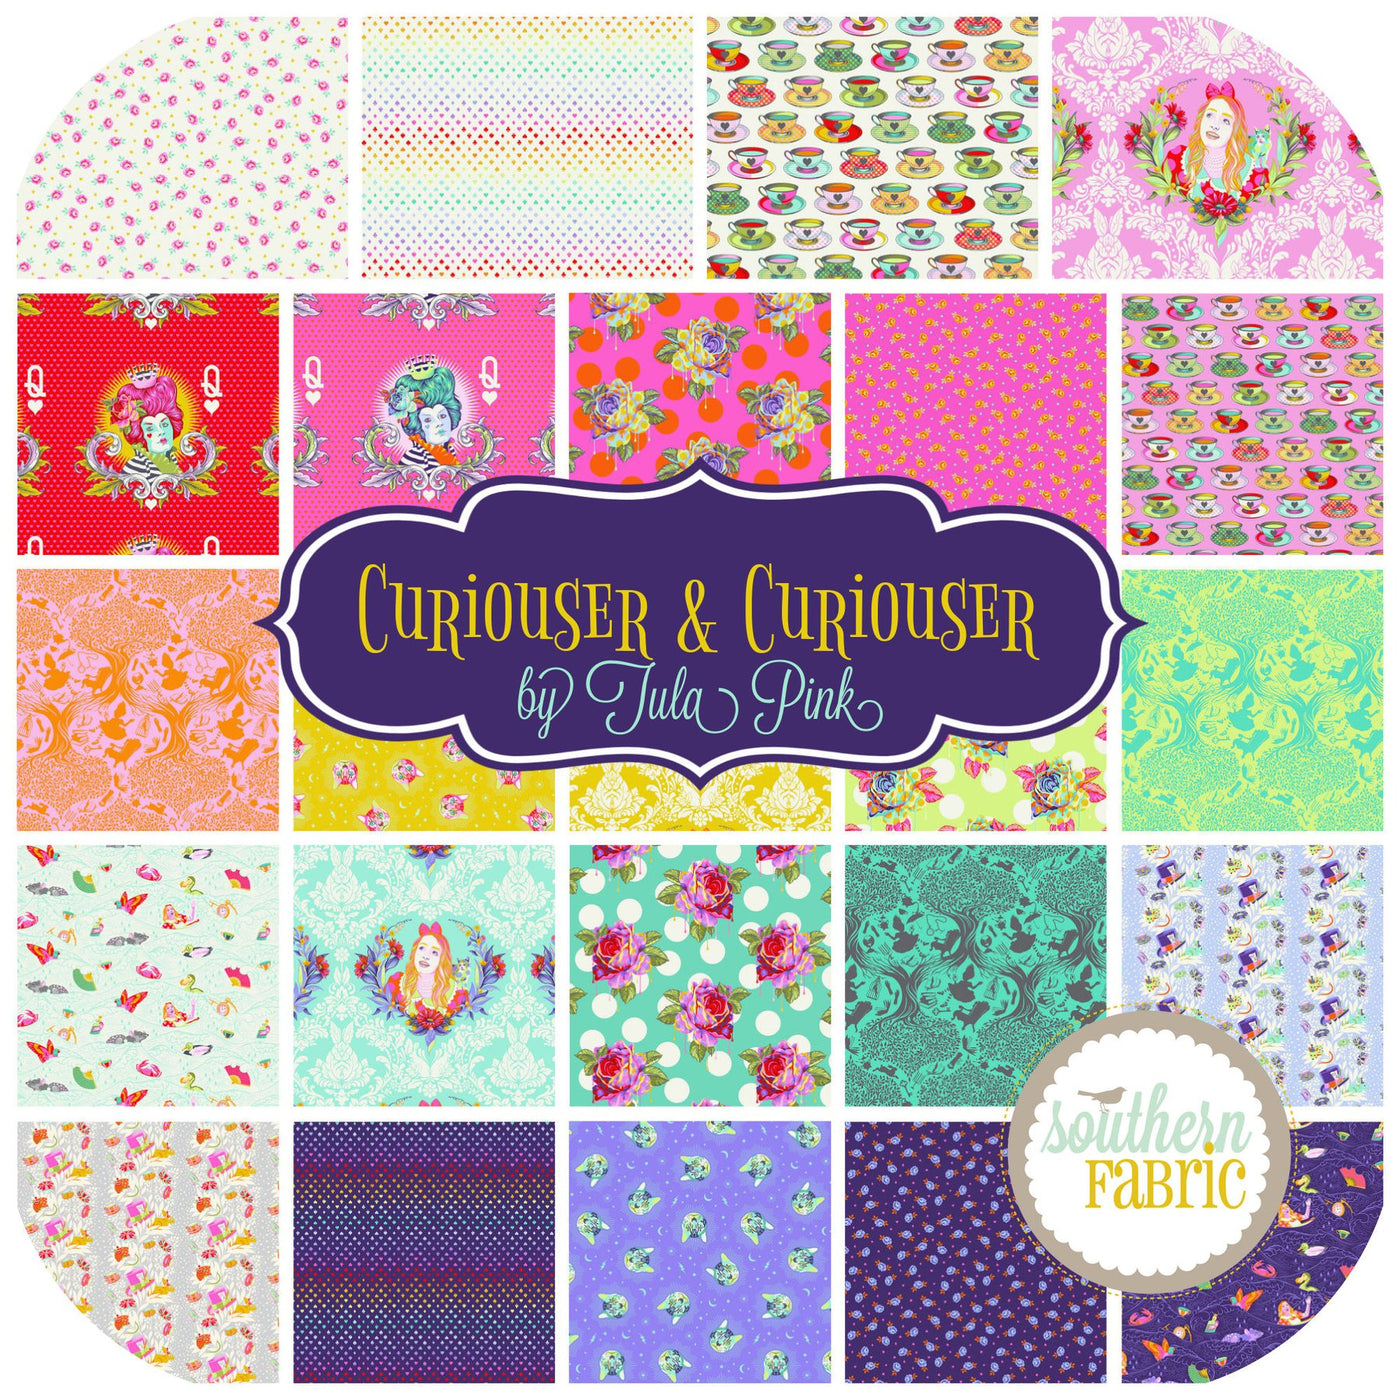 Curiouser and Curiouser Fat Quarter Bundle (25 pcs) by Tula Pink for Free Spirit SF